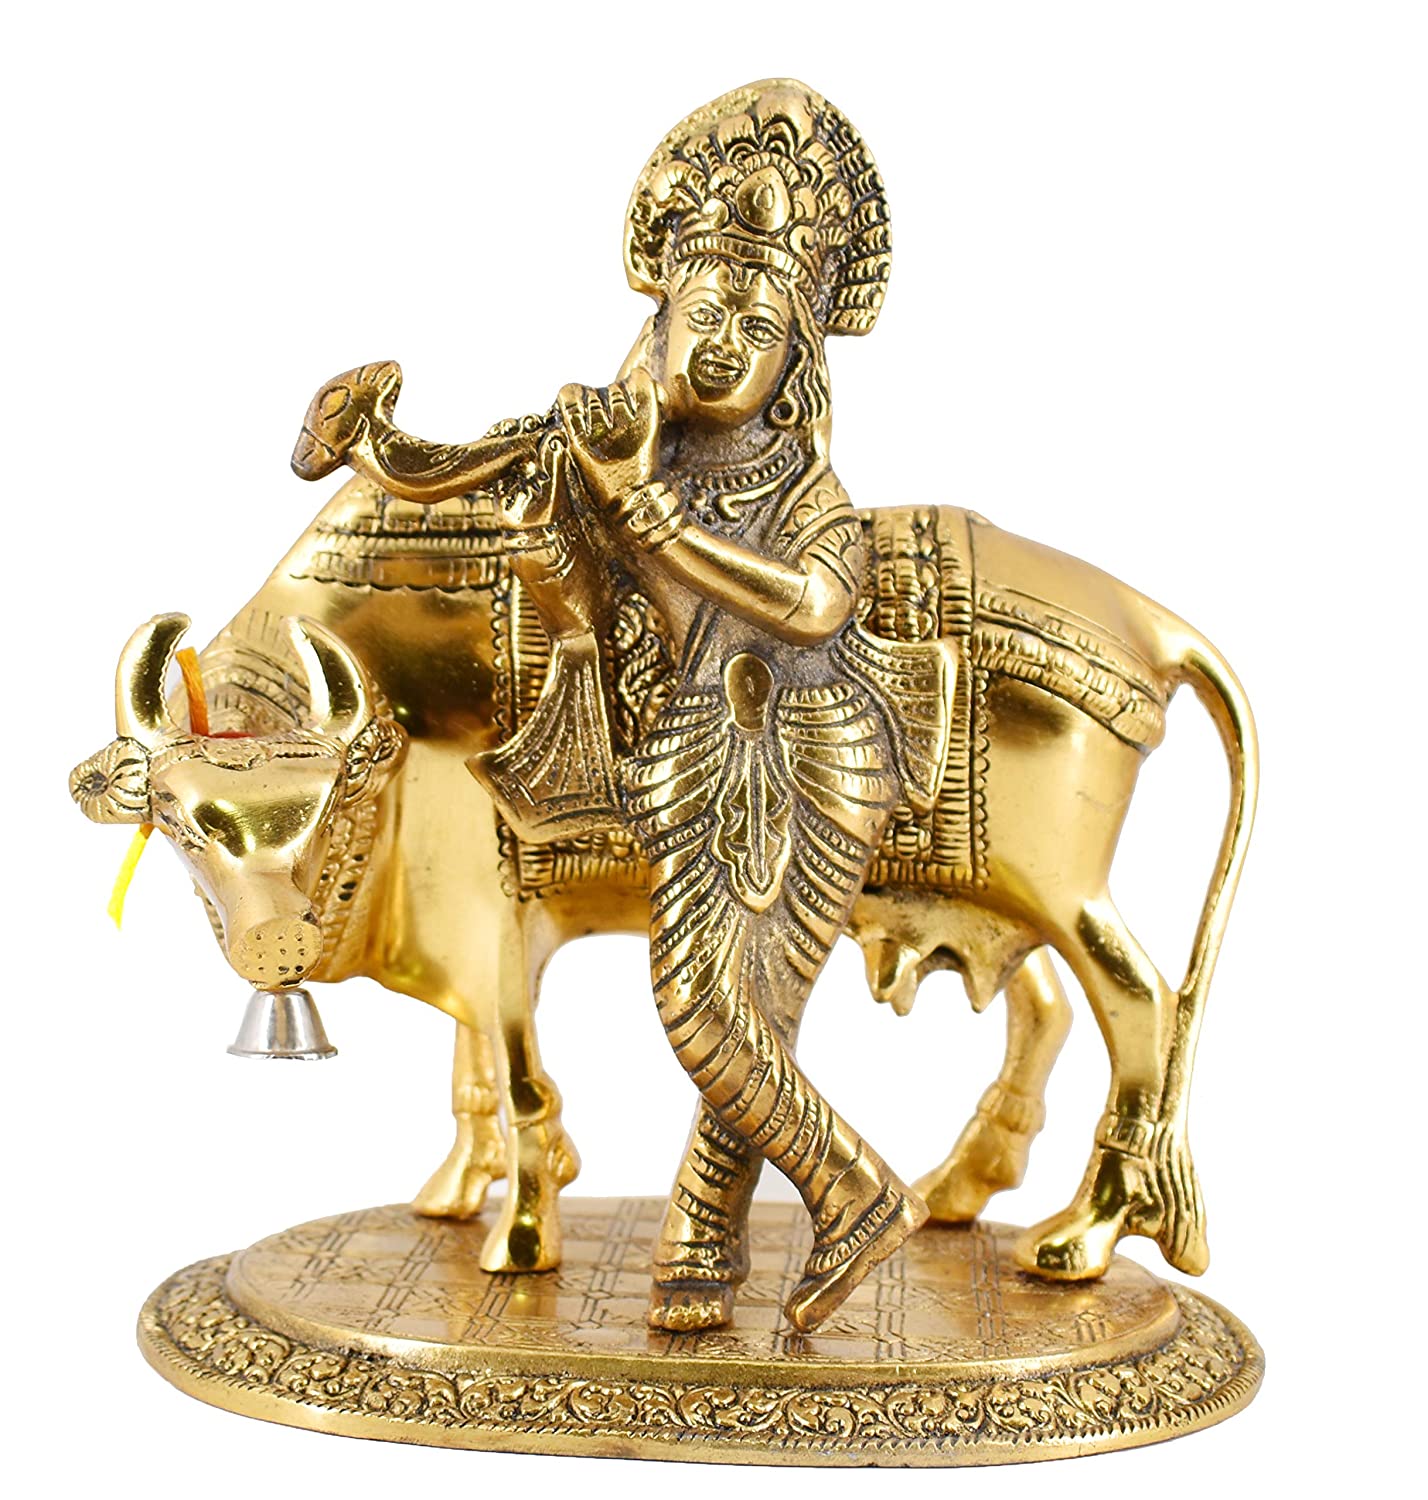 Buy CraftVatika Lord Krishna Idol Brass Decorative Showpiece Krishna  Playing Flute Statue for Home Office Living Room Decor Gifts for Corporate  Employees Mother Father Online at Low Prices in India - Amazon.in